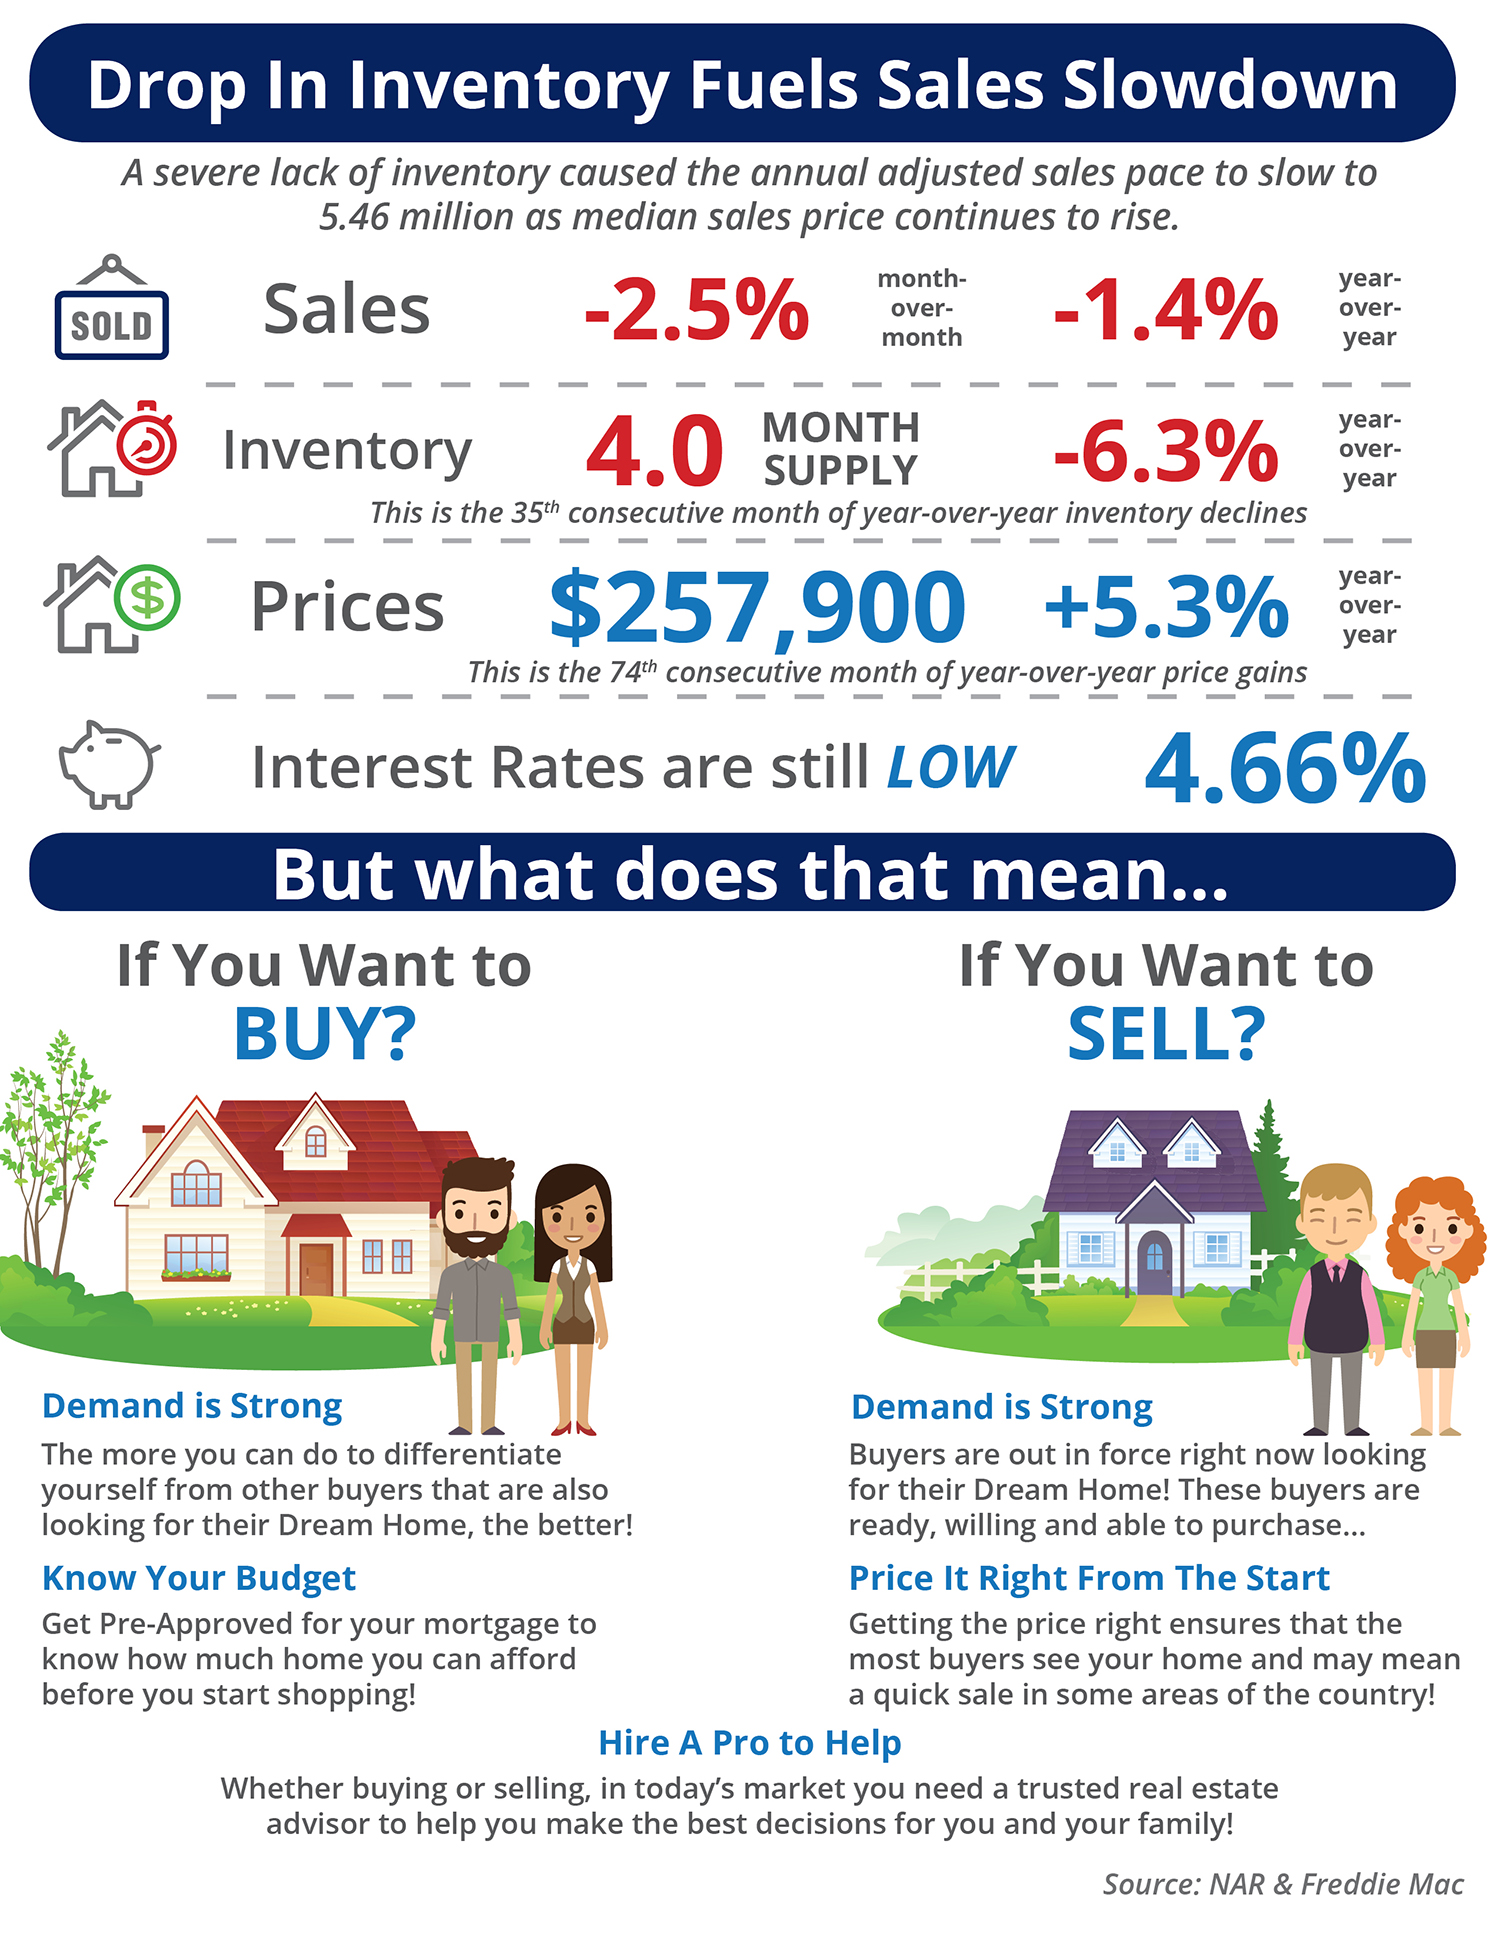 Drop in Inventory Fuels Sales Slowdown [INFOGRAPHIC]